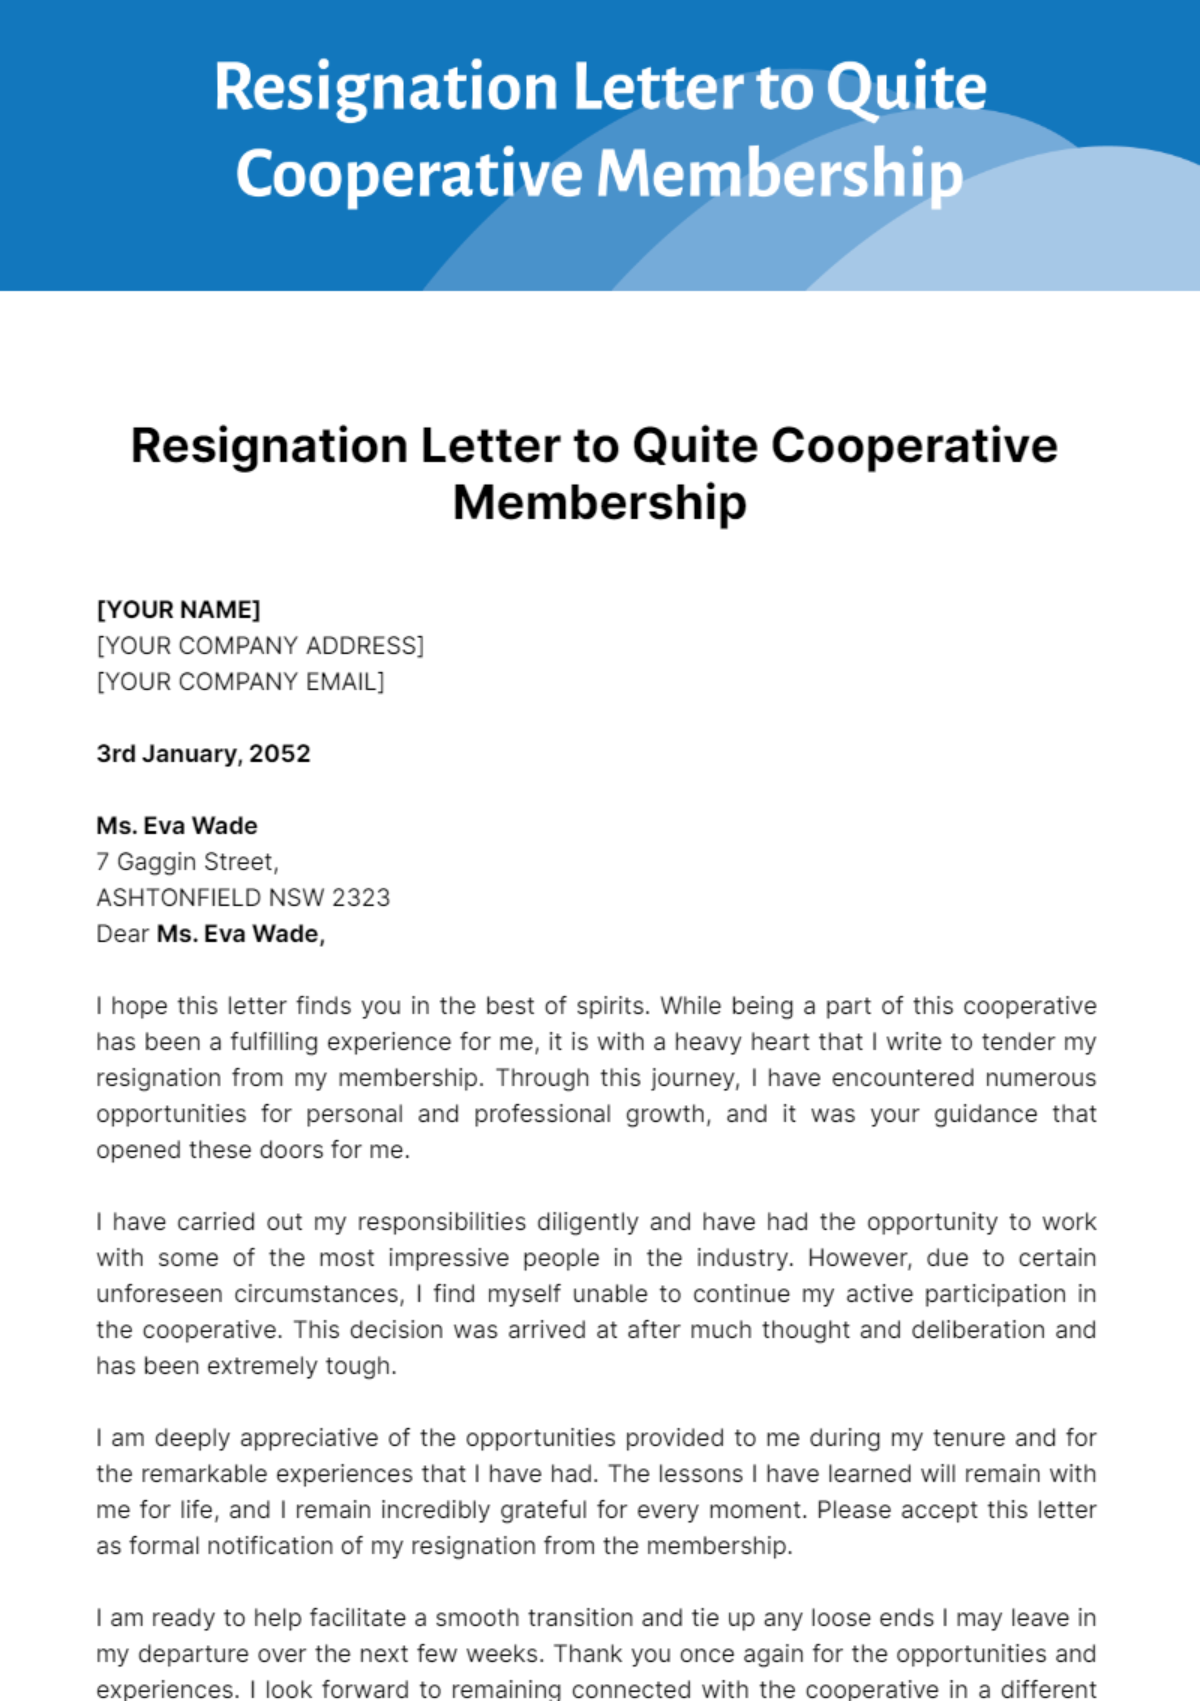 Free Resignation Letter to Quite Cooperative Membership Template